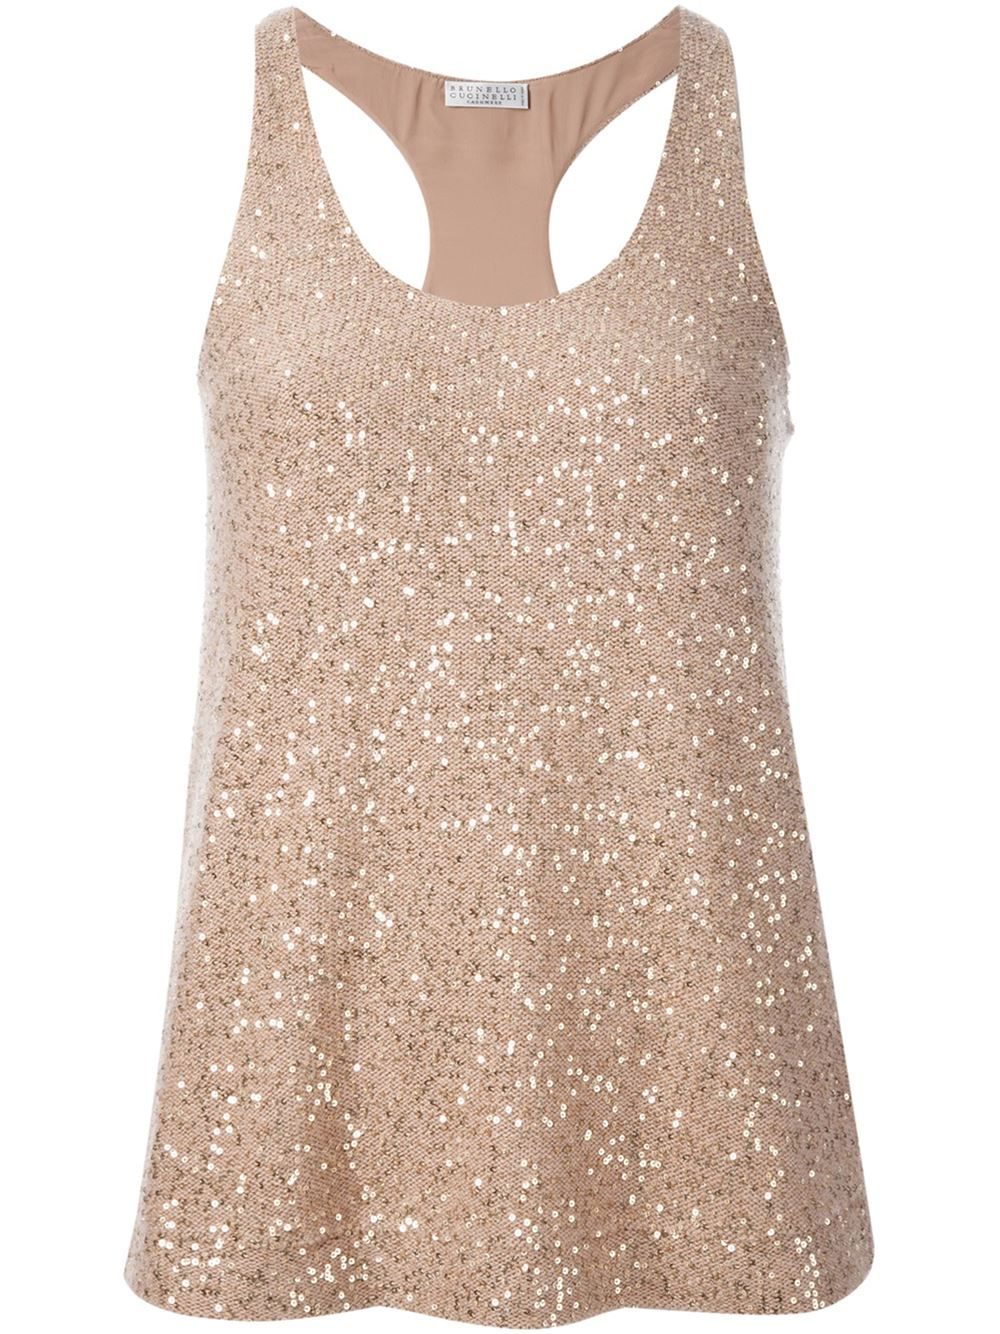 Brunello Cucinelli Sequined Tank Top in Natural - Lyst